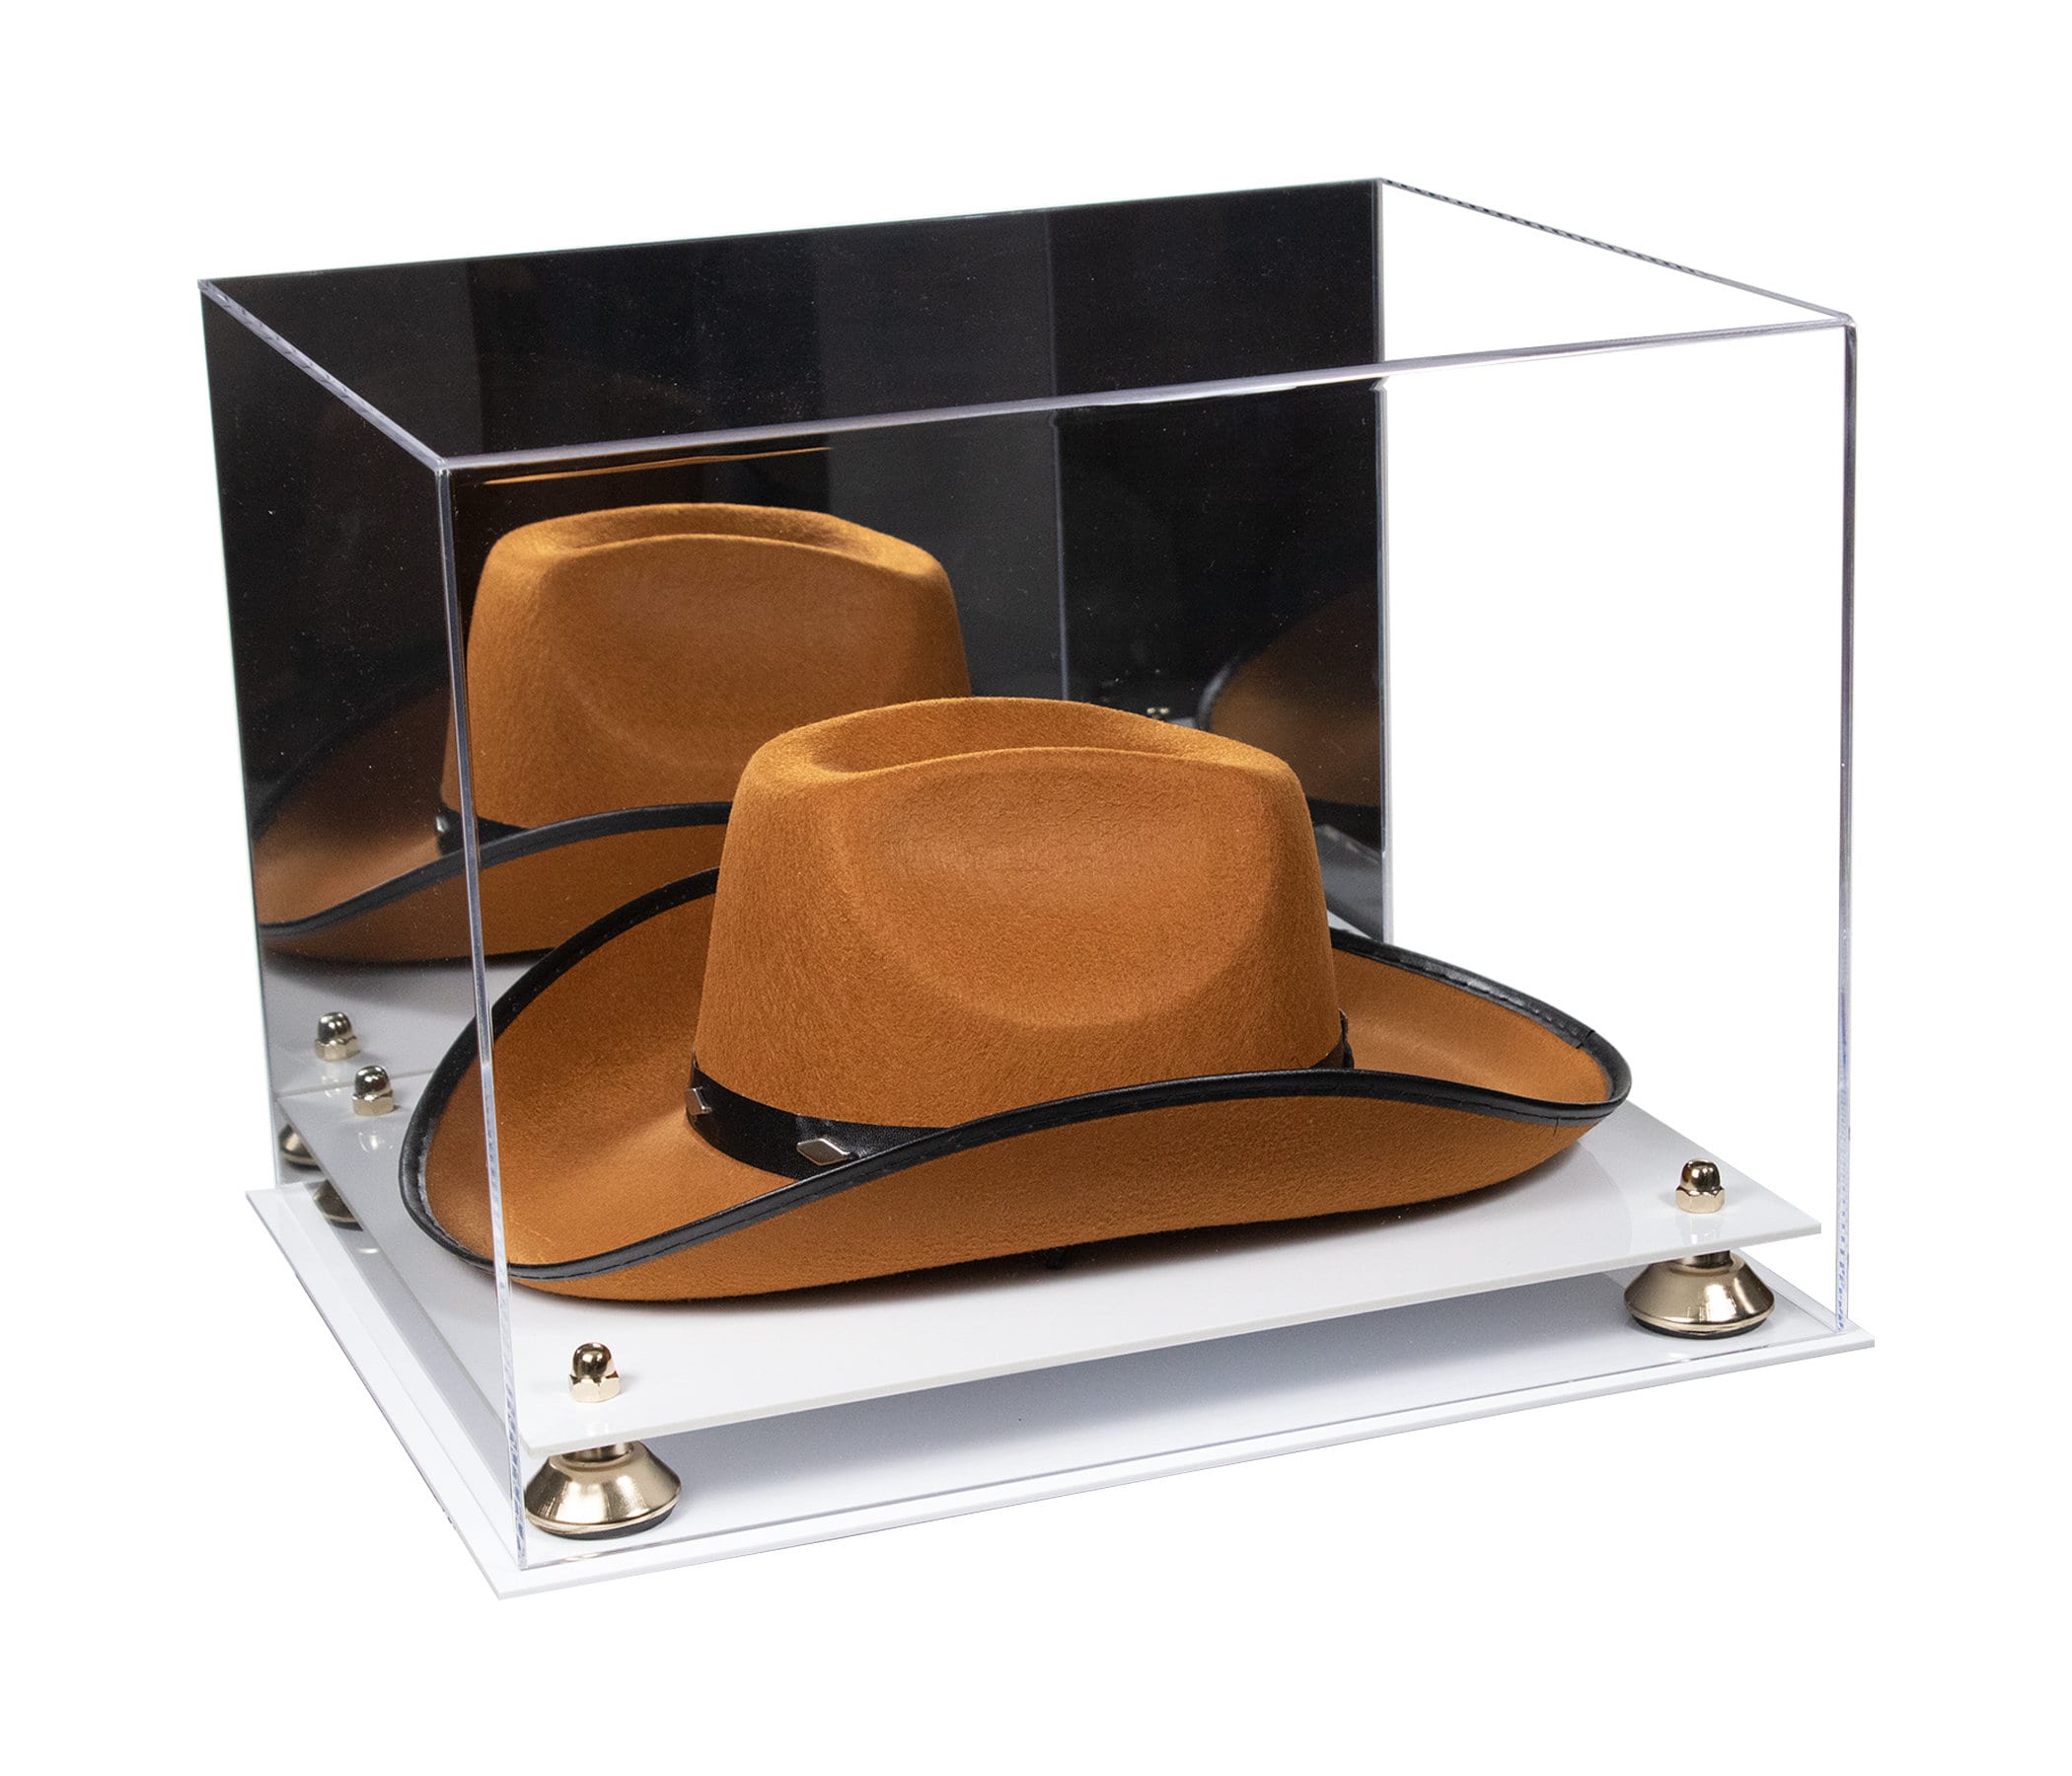  Cowboy Hat Travel Case Large Wide Brim Fedora Cowboy Hat Box  Universal Size Hat Carrier for Most Hats Carry-On Hat Bag Travelling Hat  Boxes Cowgirl Hats Care - The Rider 